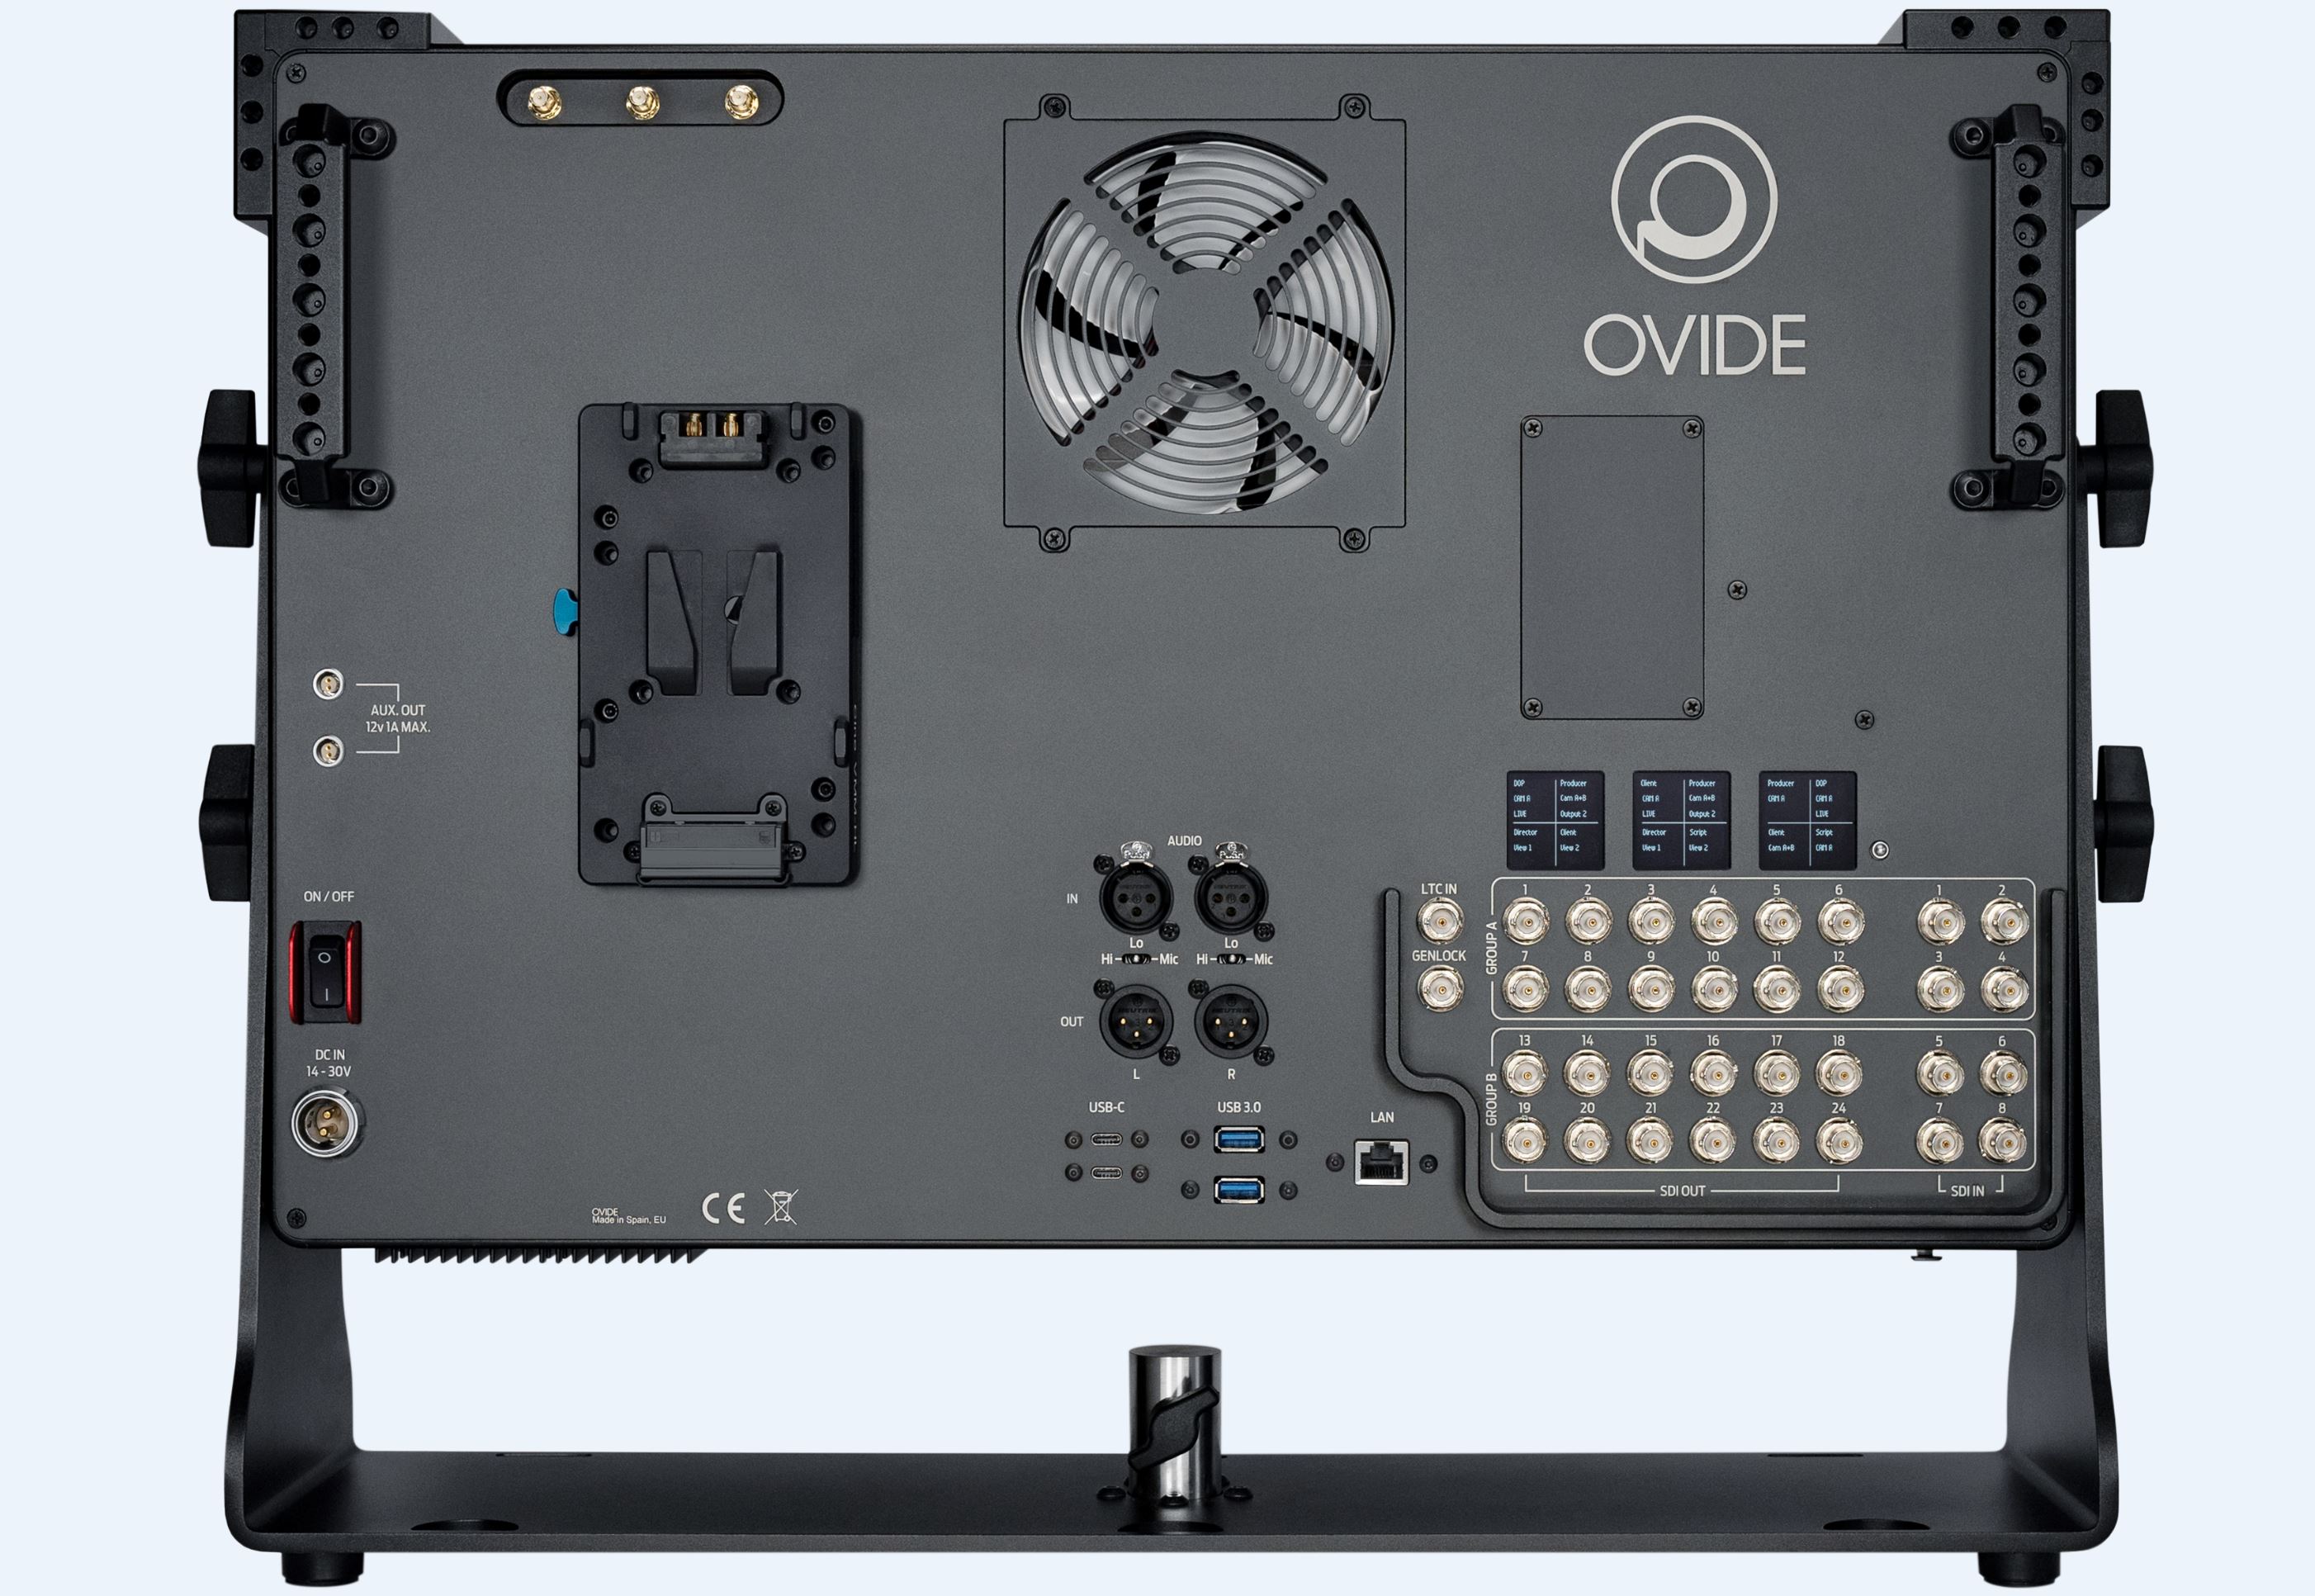 OVIDE Smart Assist OCTO - 8x 3G-SDI in / 24x 3G-SDI out